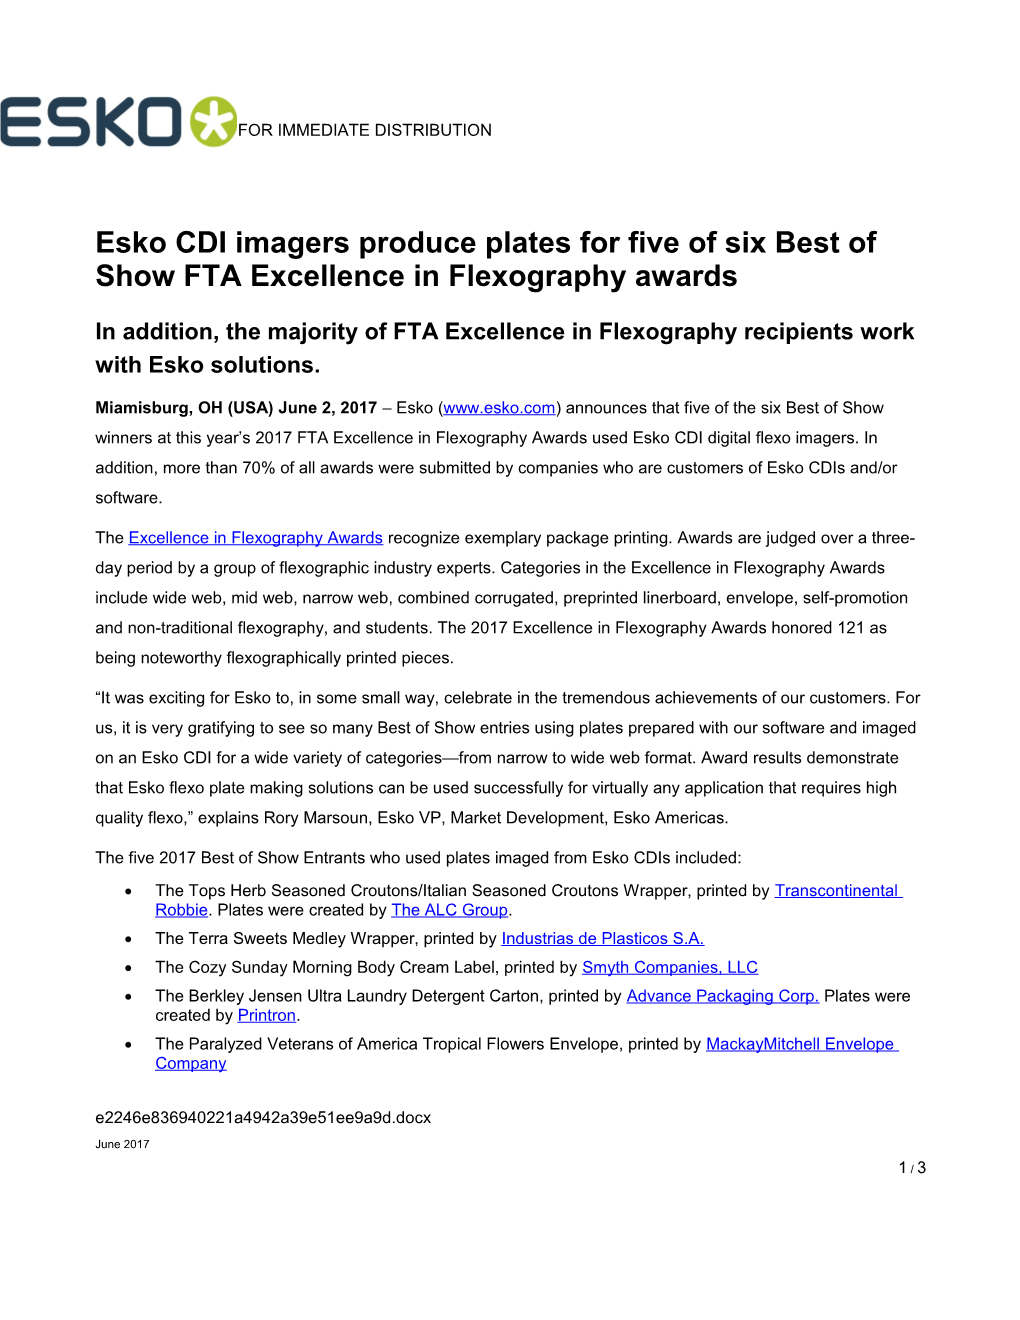 Esko CDI Imagers Produce Plates for Five of Six Best of Show FTA Excellence in Flexography